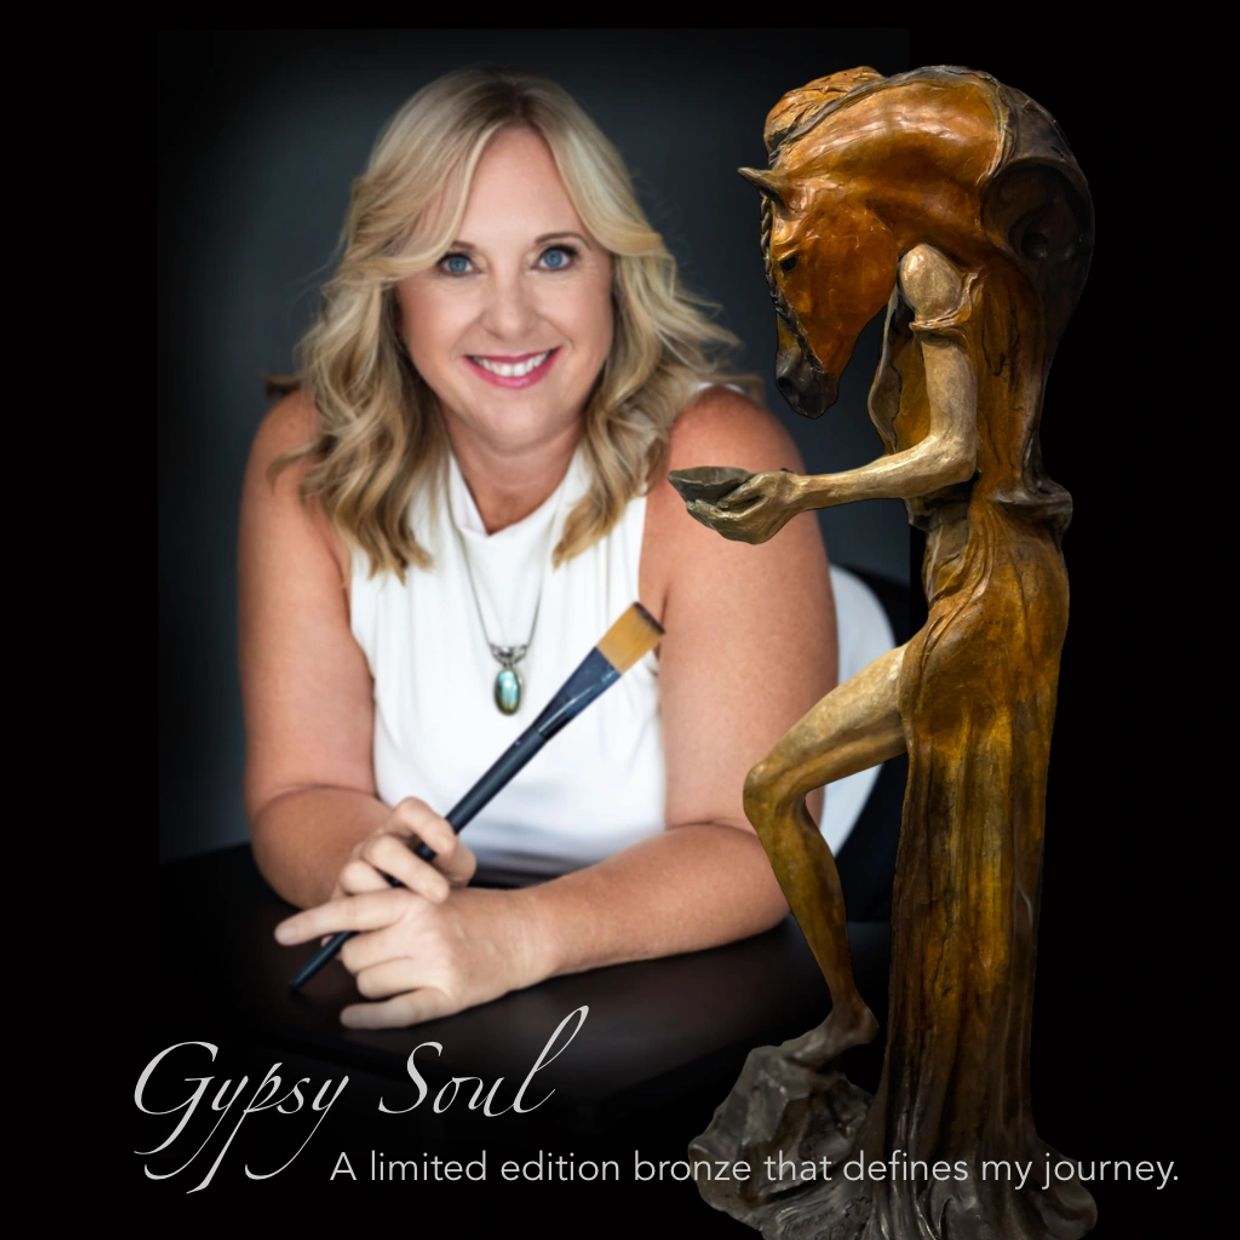 Gypsy Soul limited edition bronze sculpture by Tammy Tappan Equestrian Artist